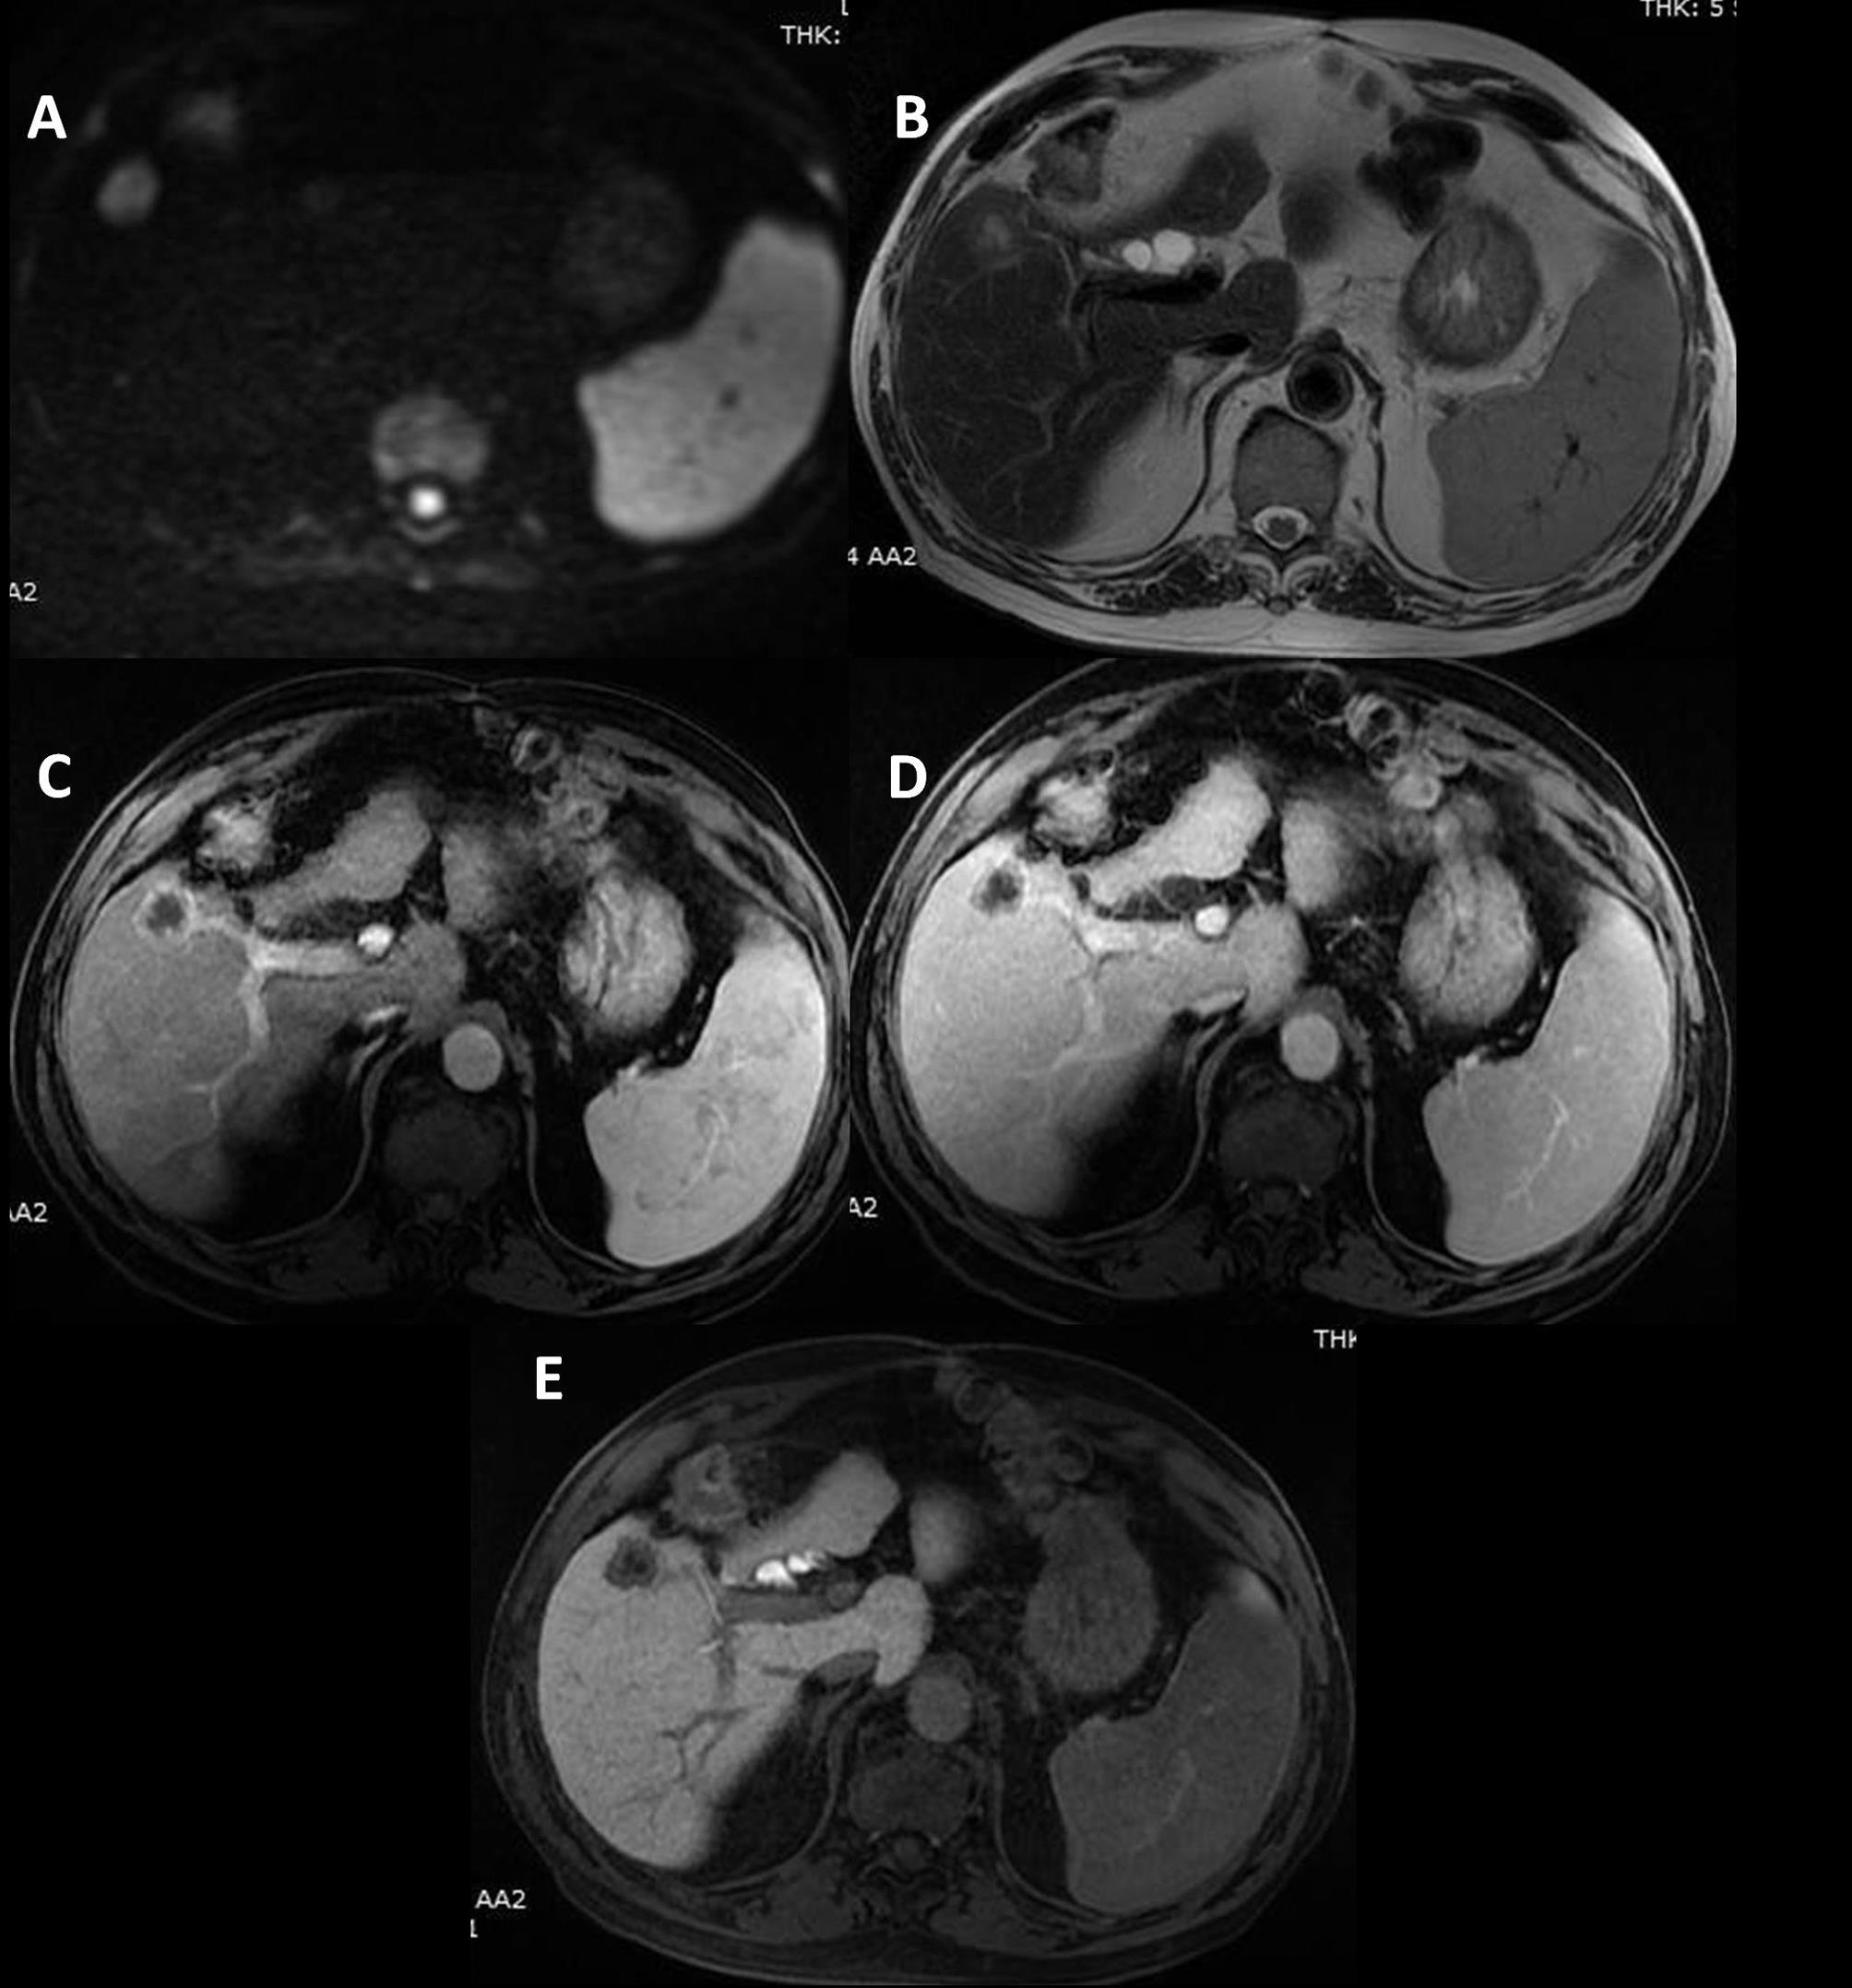 A 69-year-old man with hepatitis C cirrhosis, already treated for HCC in the past, who was referred for magnetic resonance imaging after the detection of a 25-mm hypoechoic nodule in his regular ultrasound follow-up.